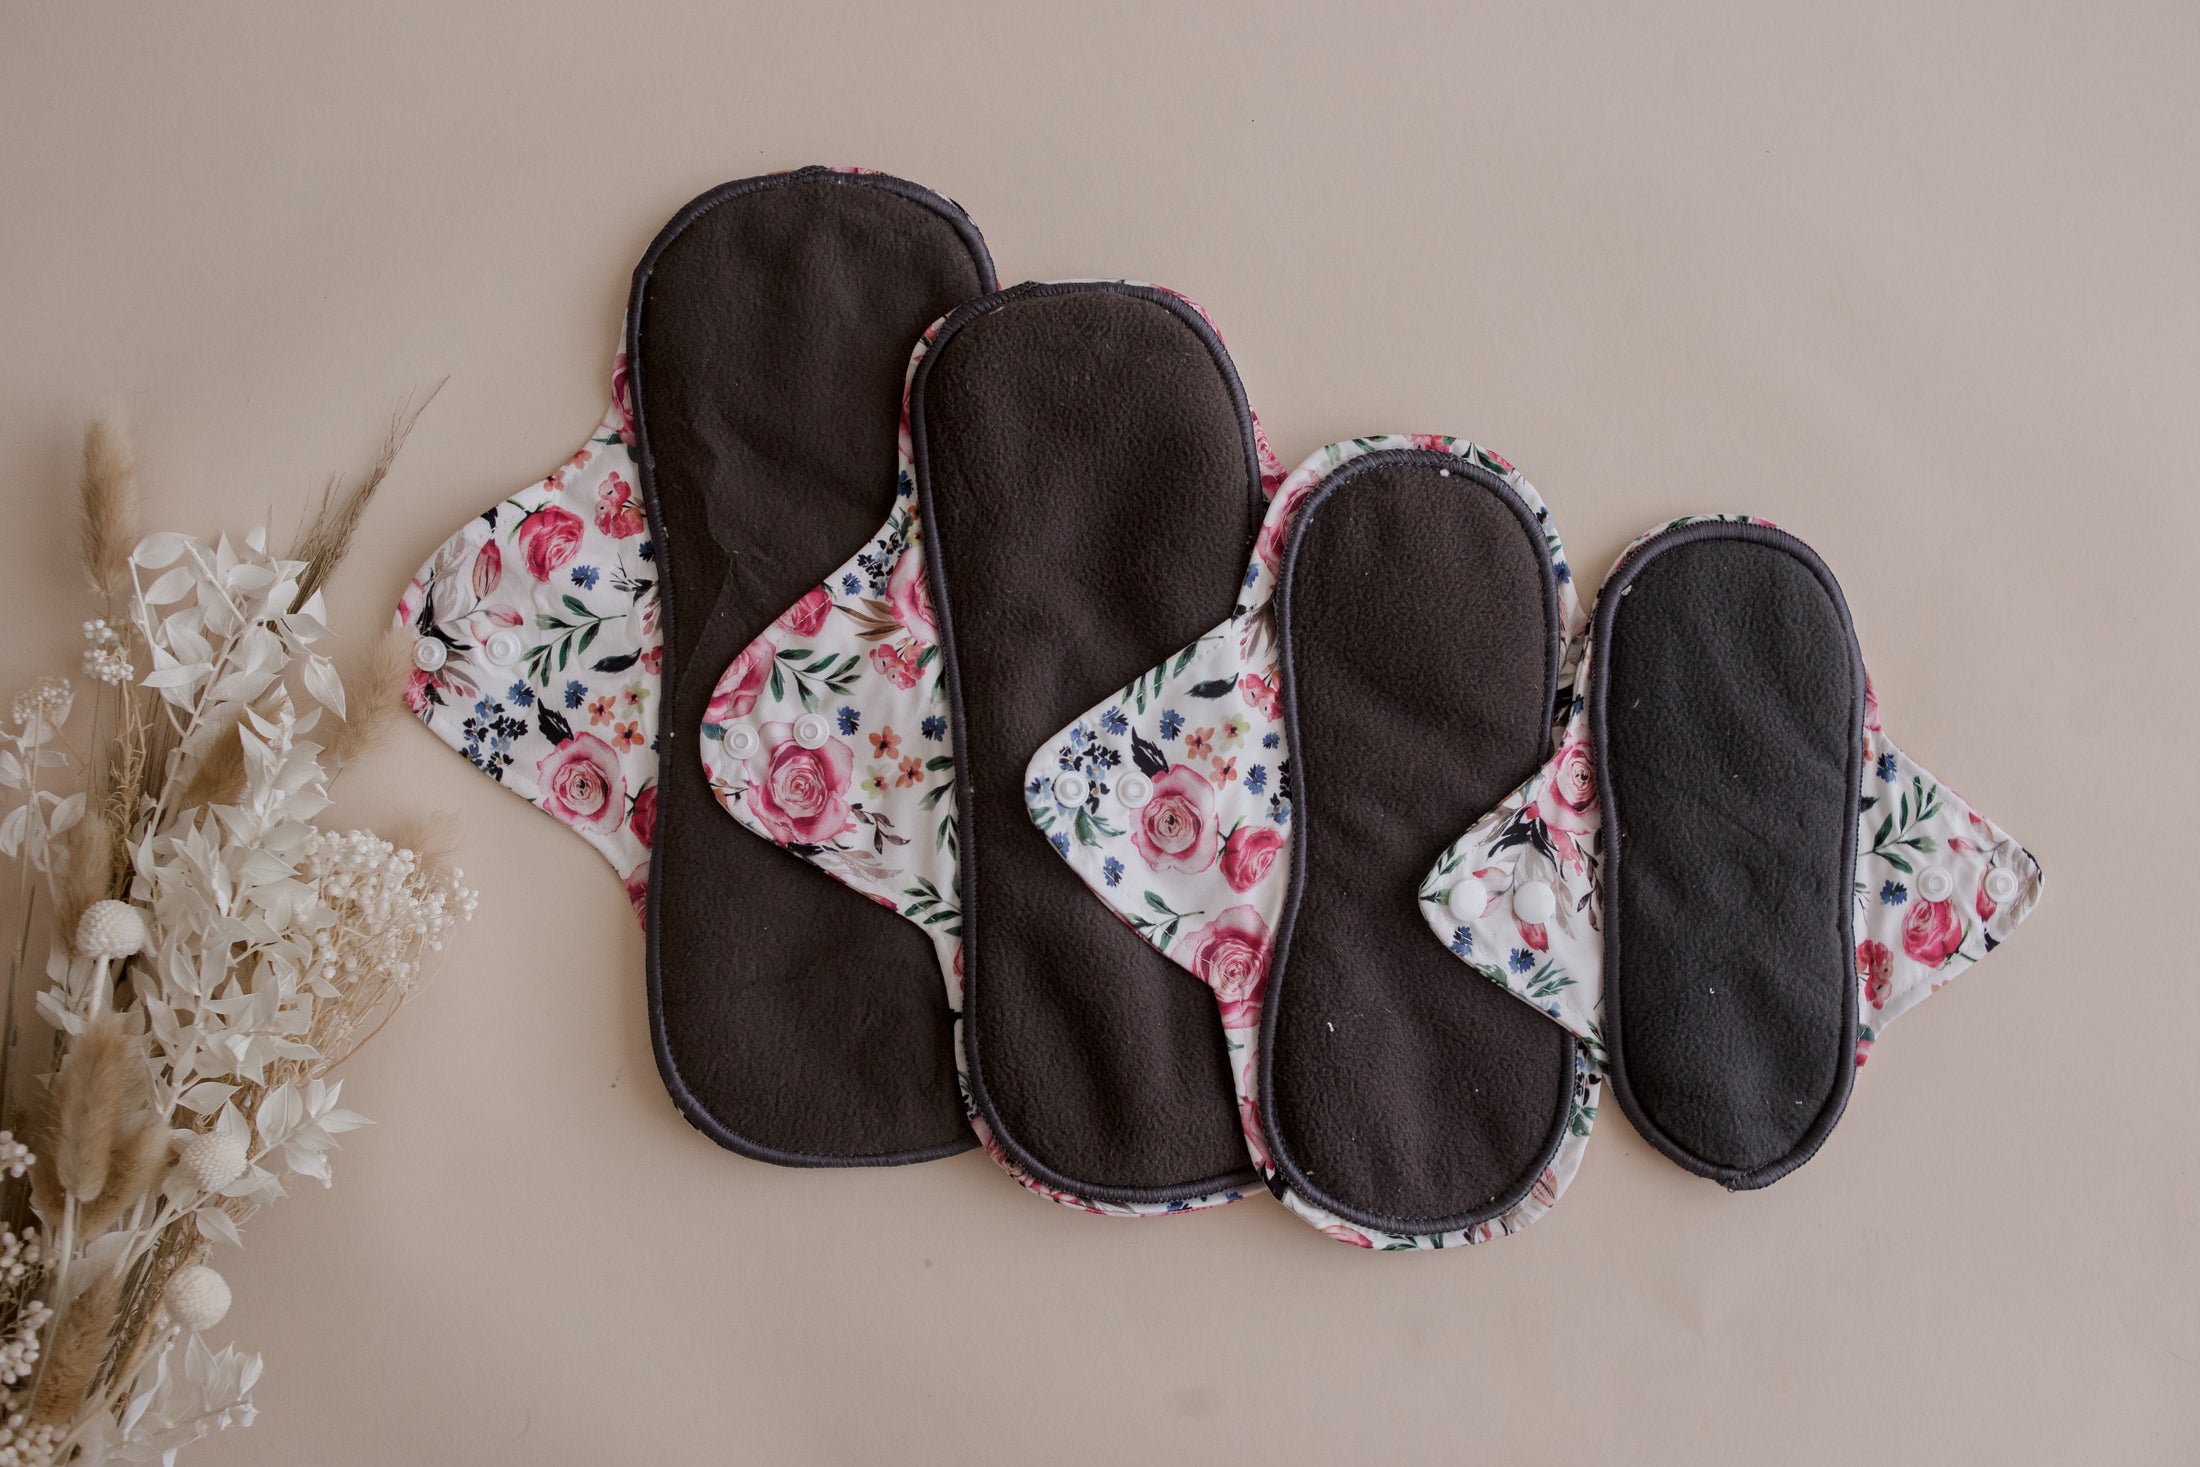 Reusable Cloth Menstrual Pads - 5 Pack with Wet Bag